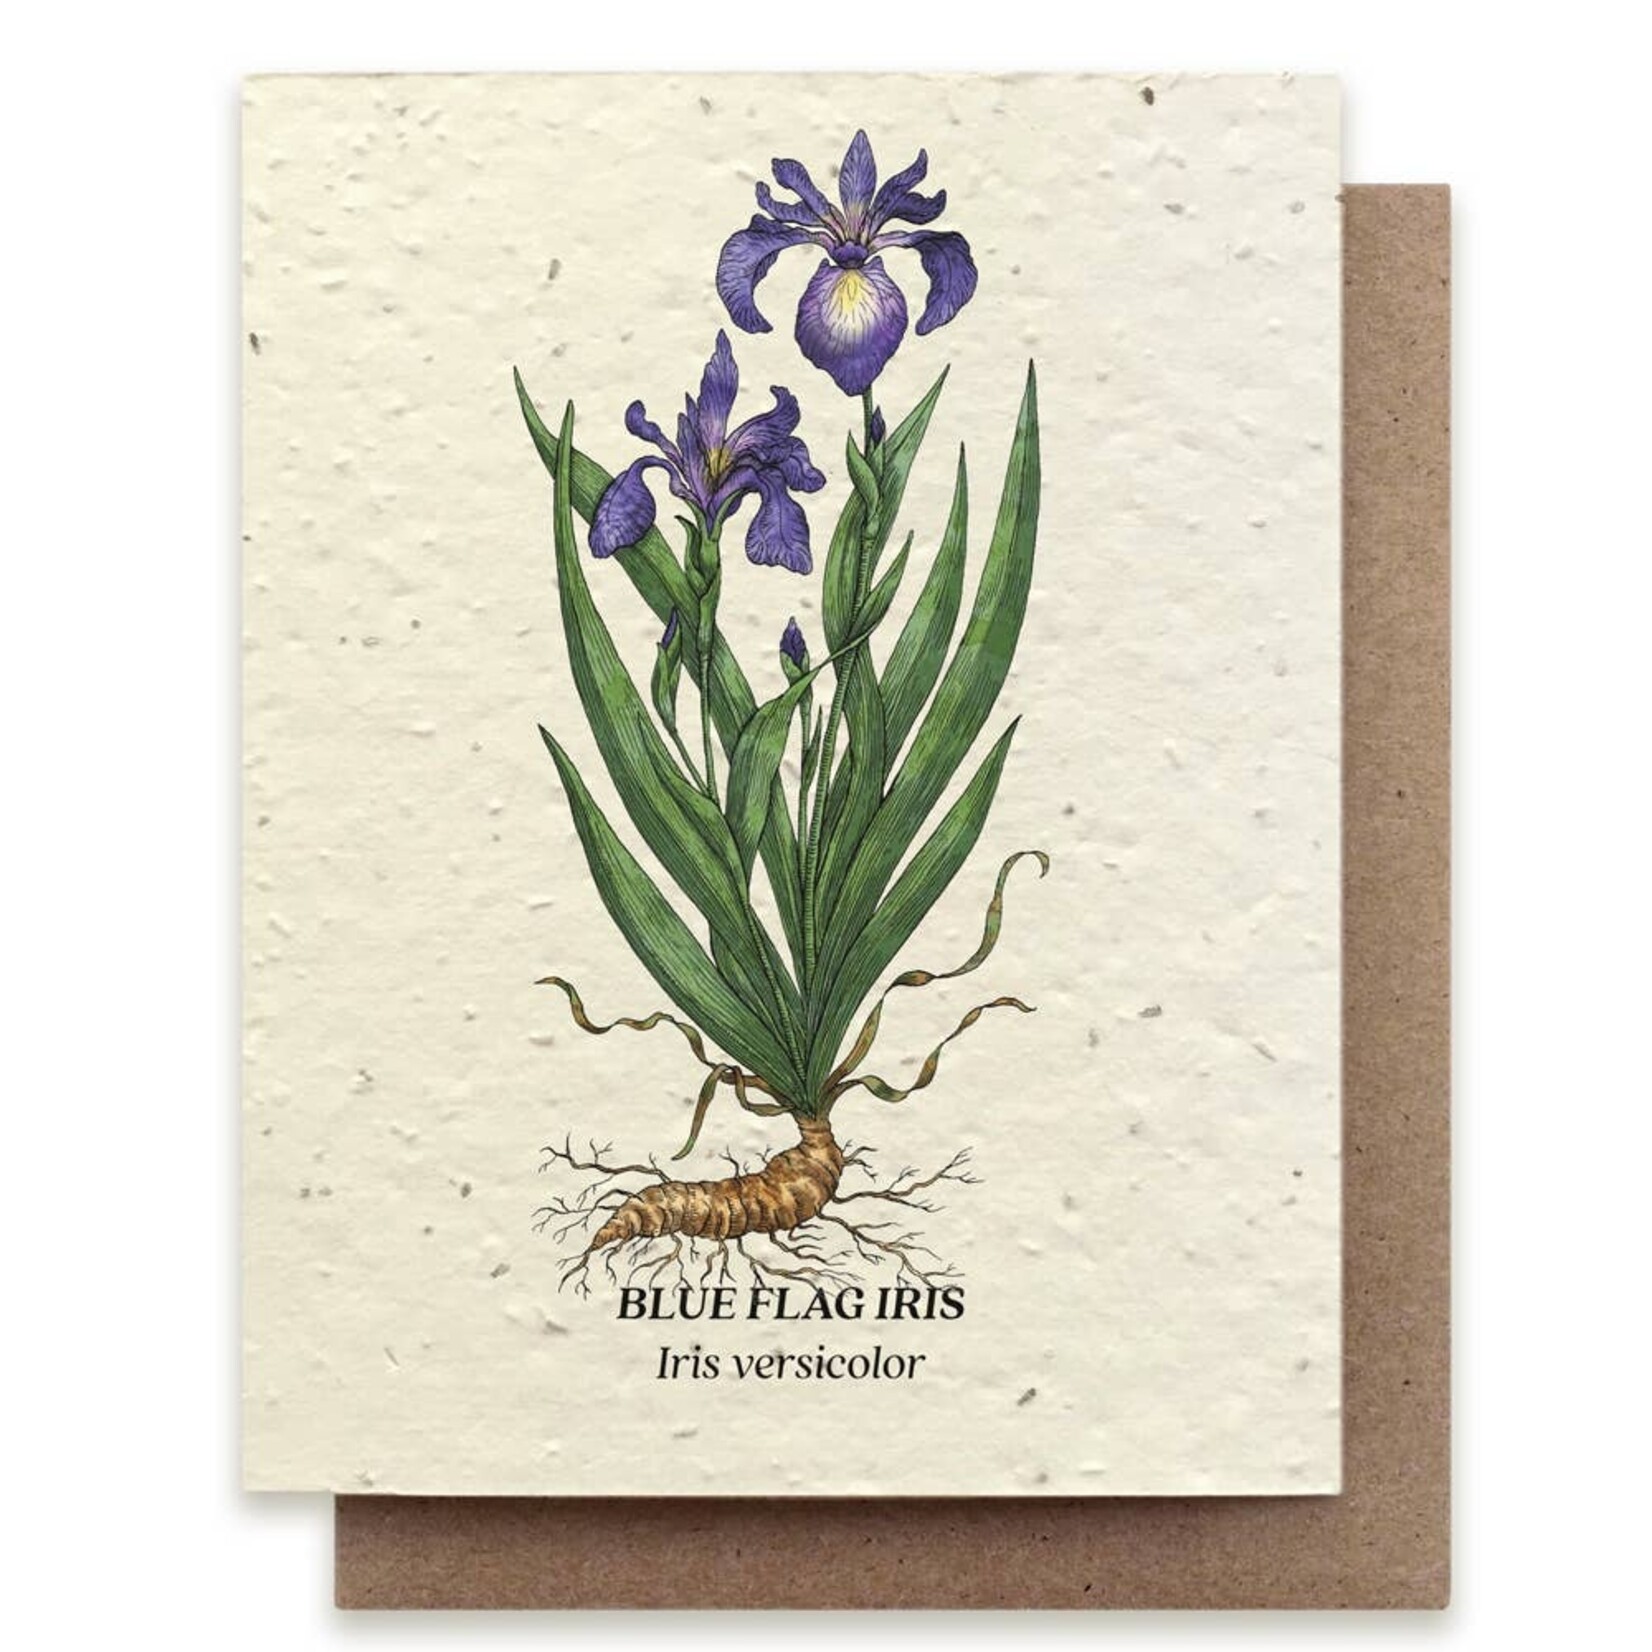 Small Victories Small Victories Blue Flag Iris Plantable Wildflower Seed Card